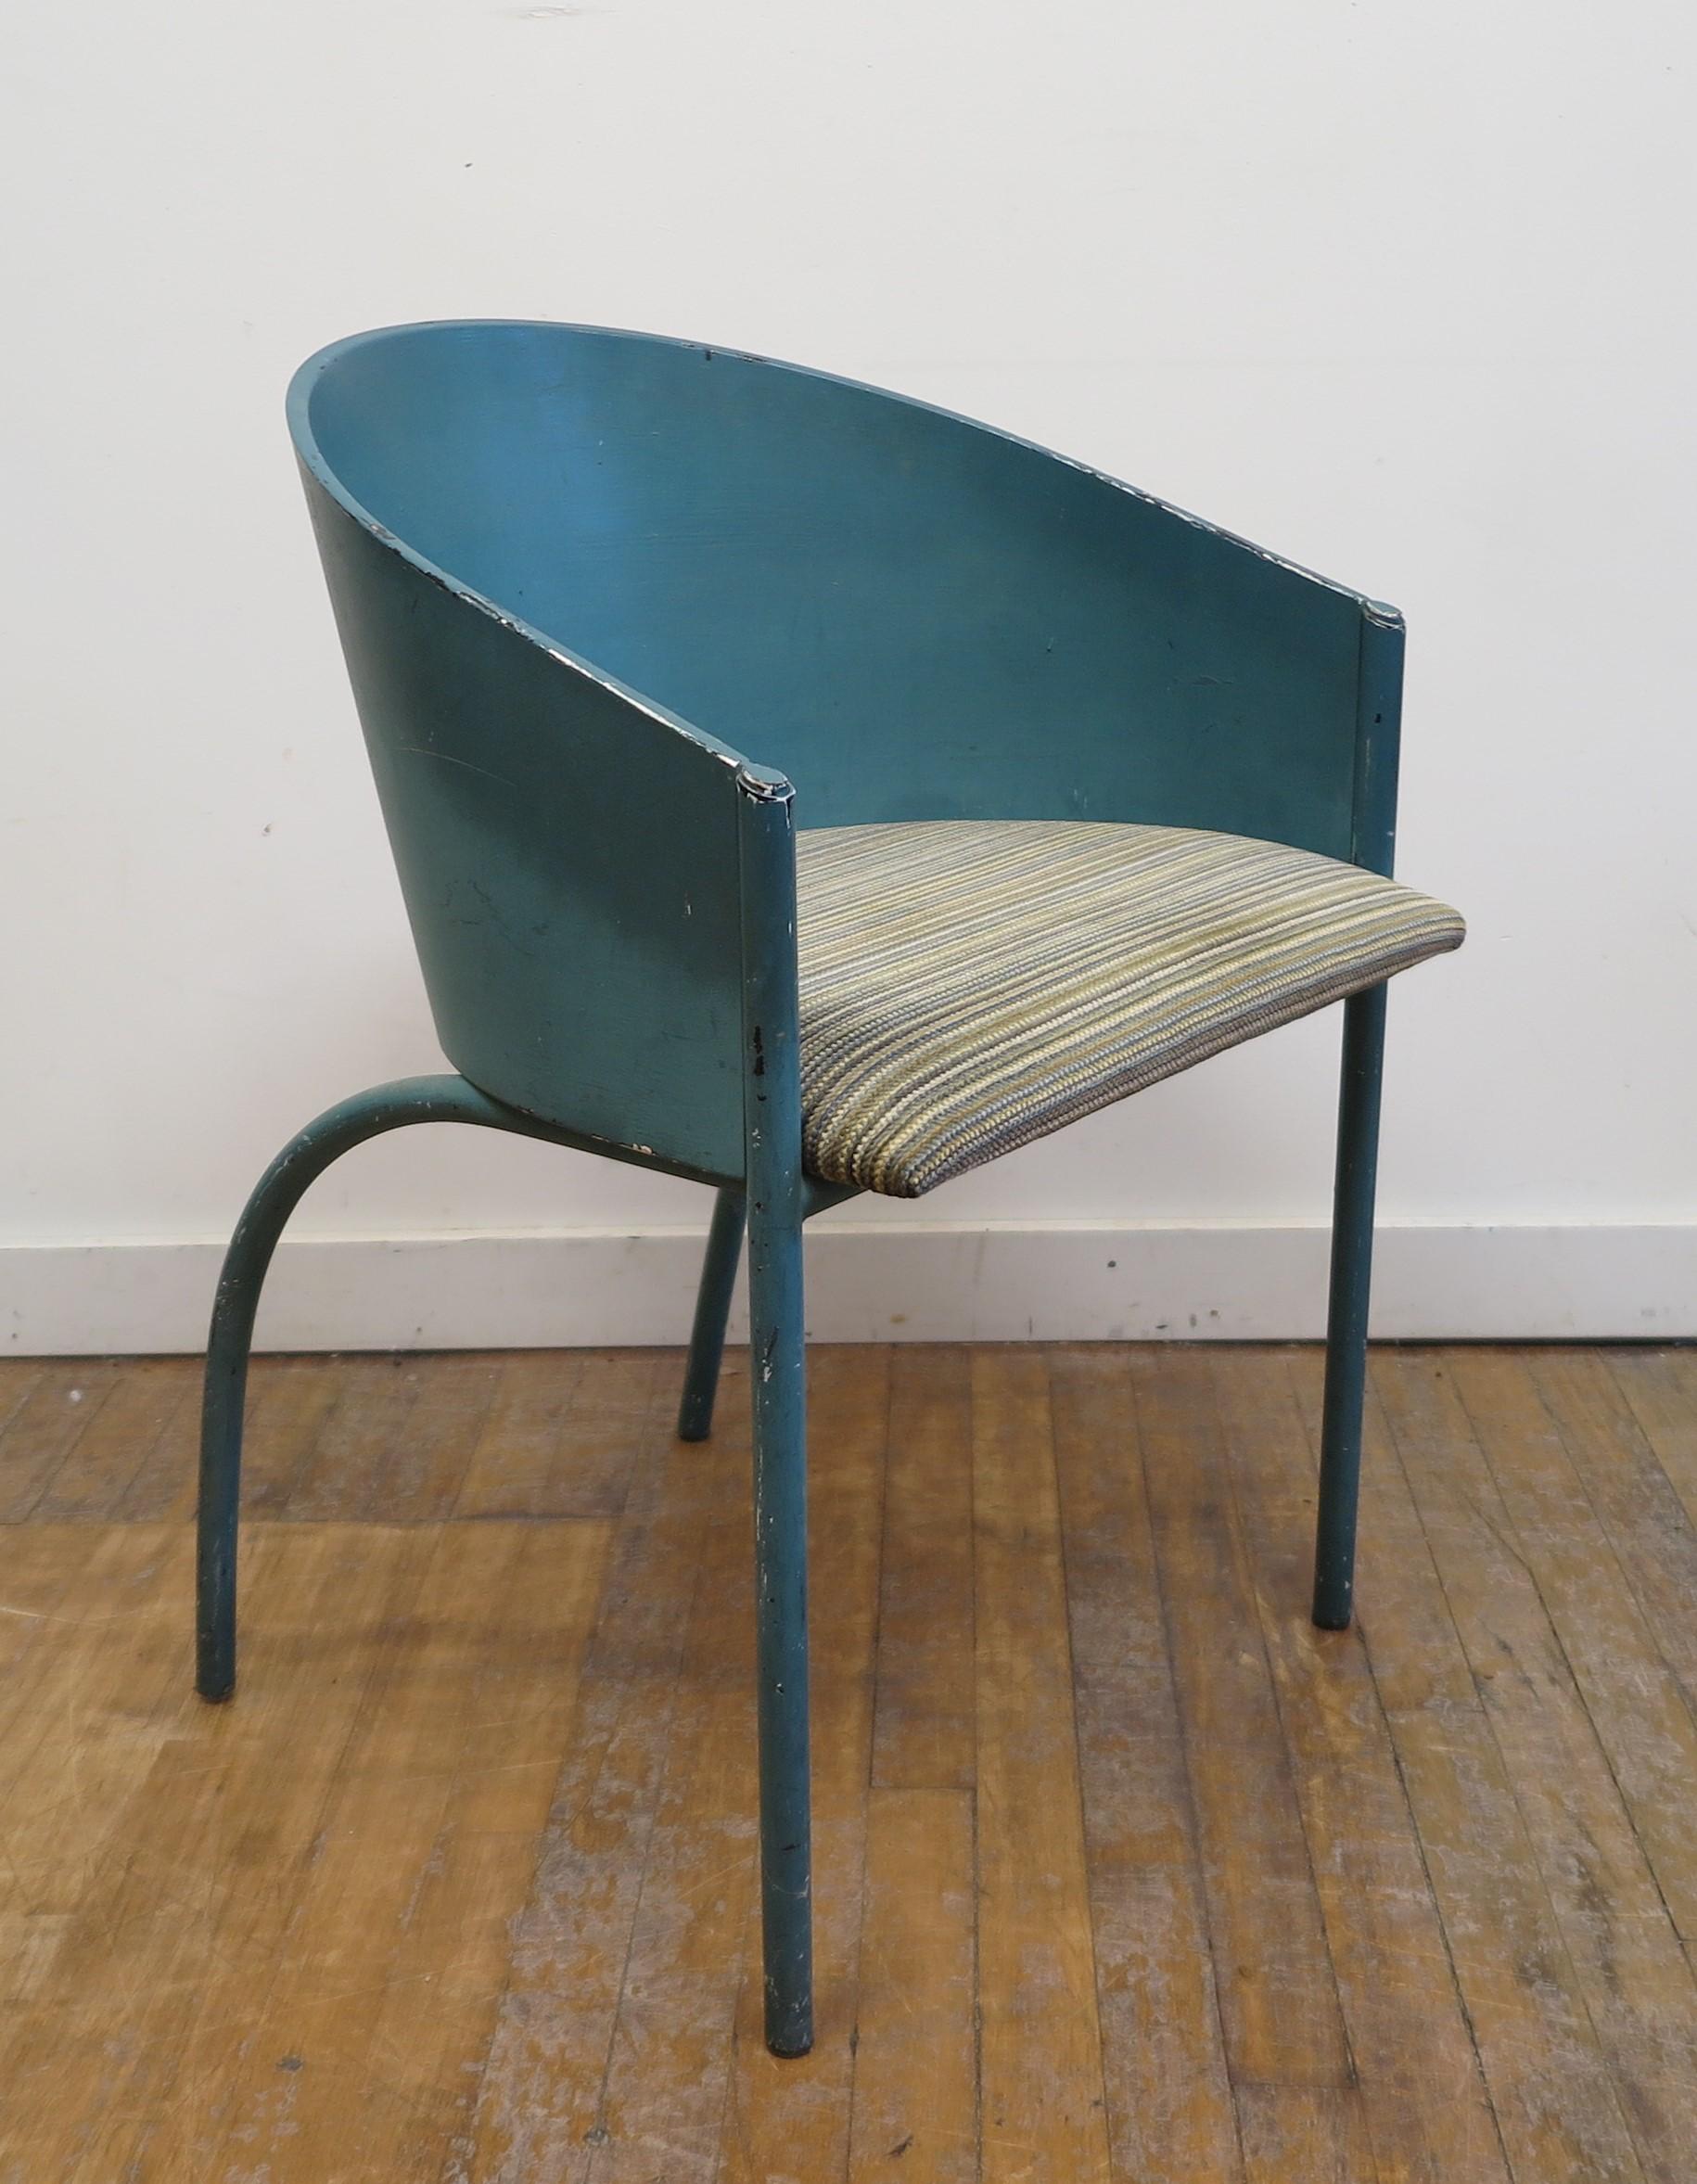 Late 20th Century Mid-Century Modern Chair Attributed to Phillip Starck